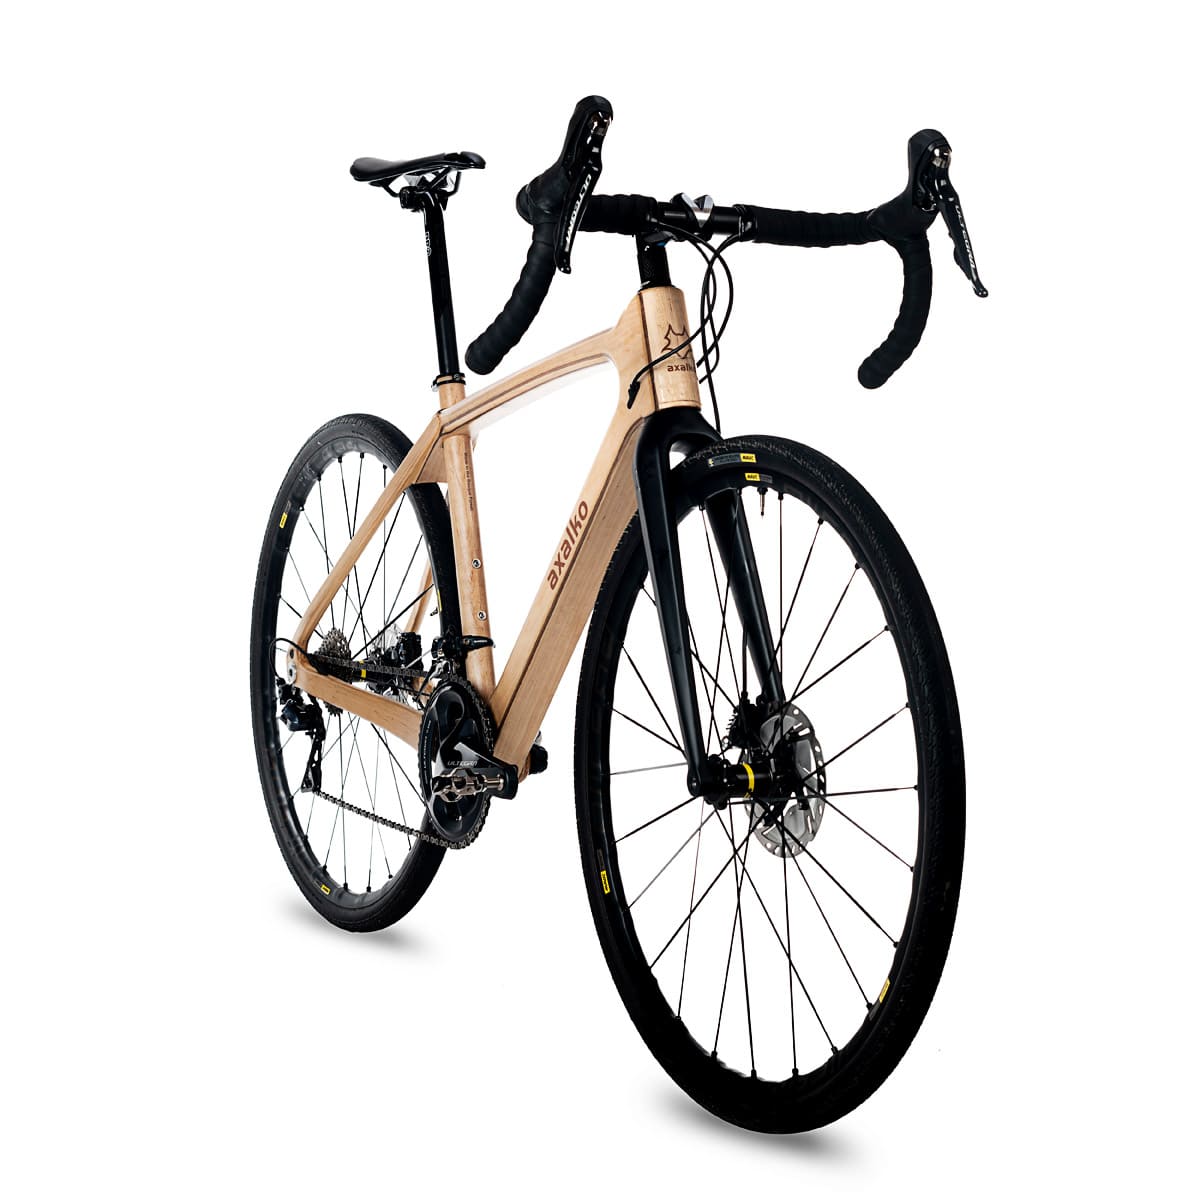 axalko High end bicycle frames made of natural fibers